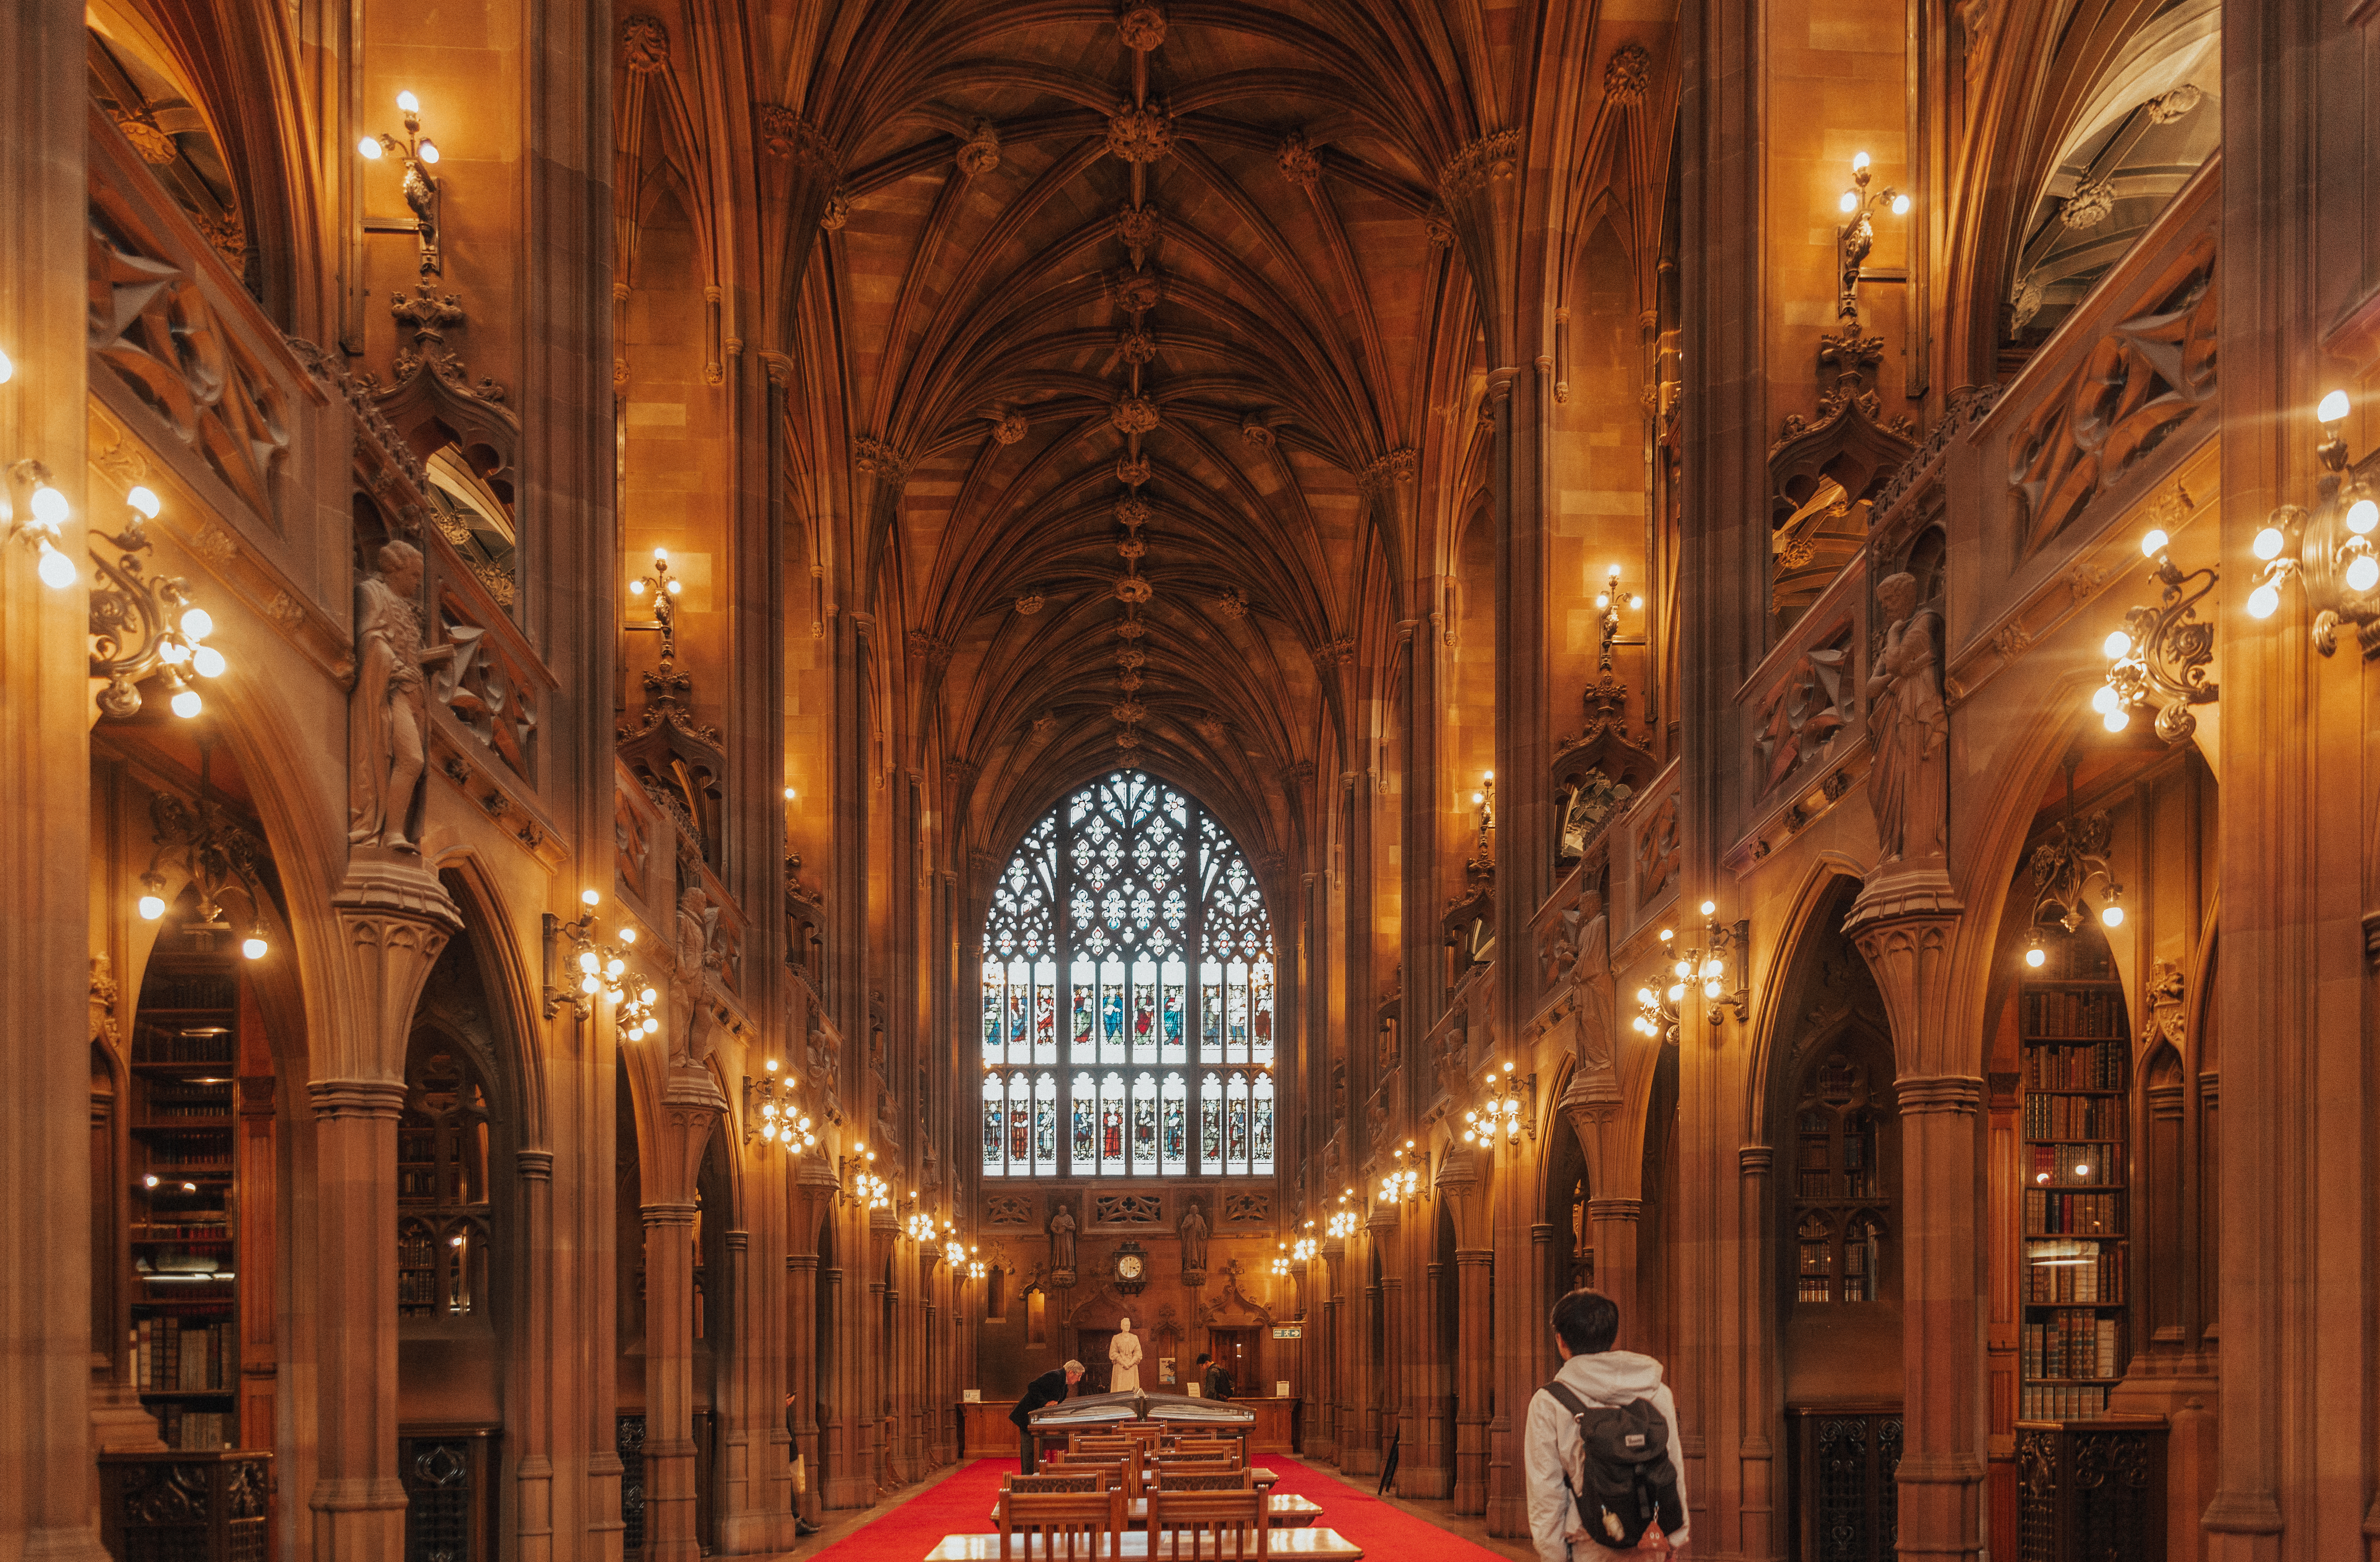 John Rylands Library, Manchester - How to spend a weekend in Manchester